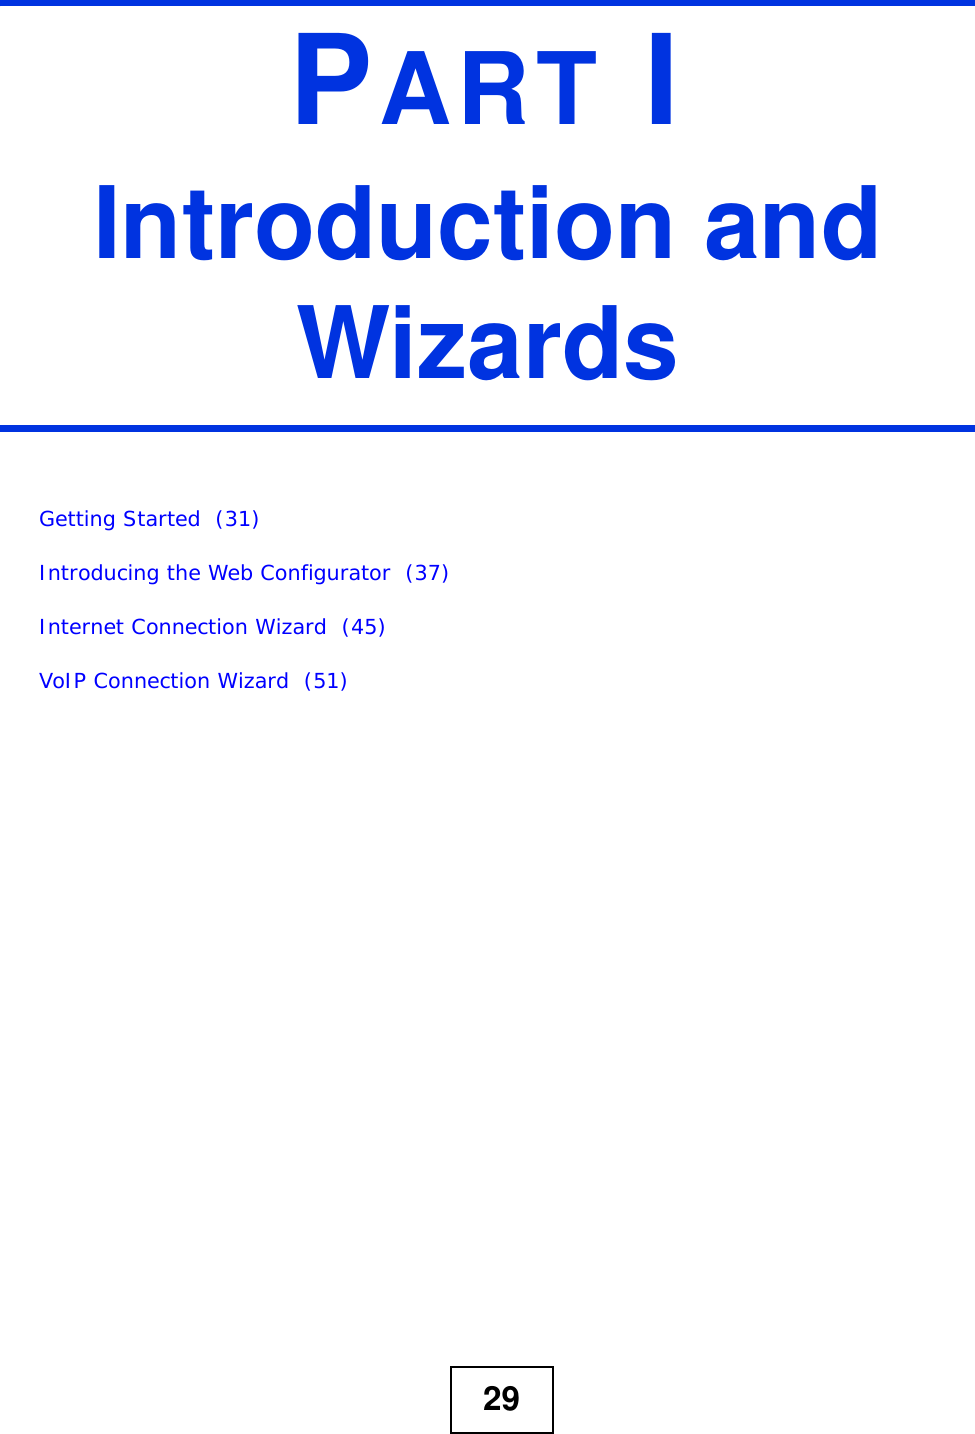 29PART IIntroduction and WizardsGetting Started  (31)Introducing the Web Configurator  (37)Internet Connection Wizard  (45)VoIP Connection Wizard  (51)